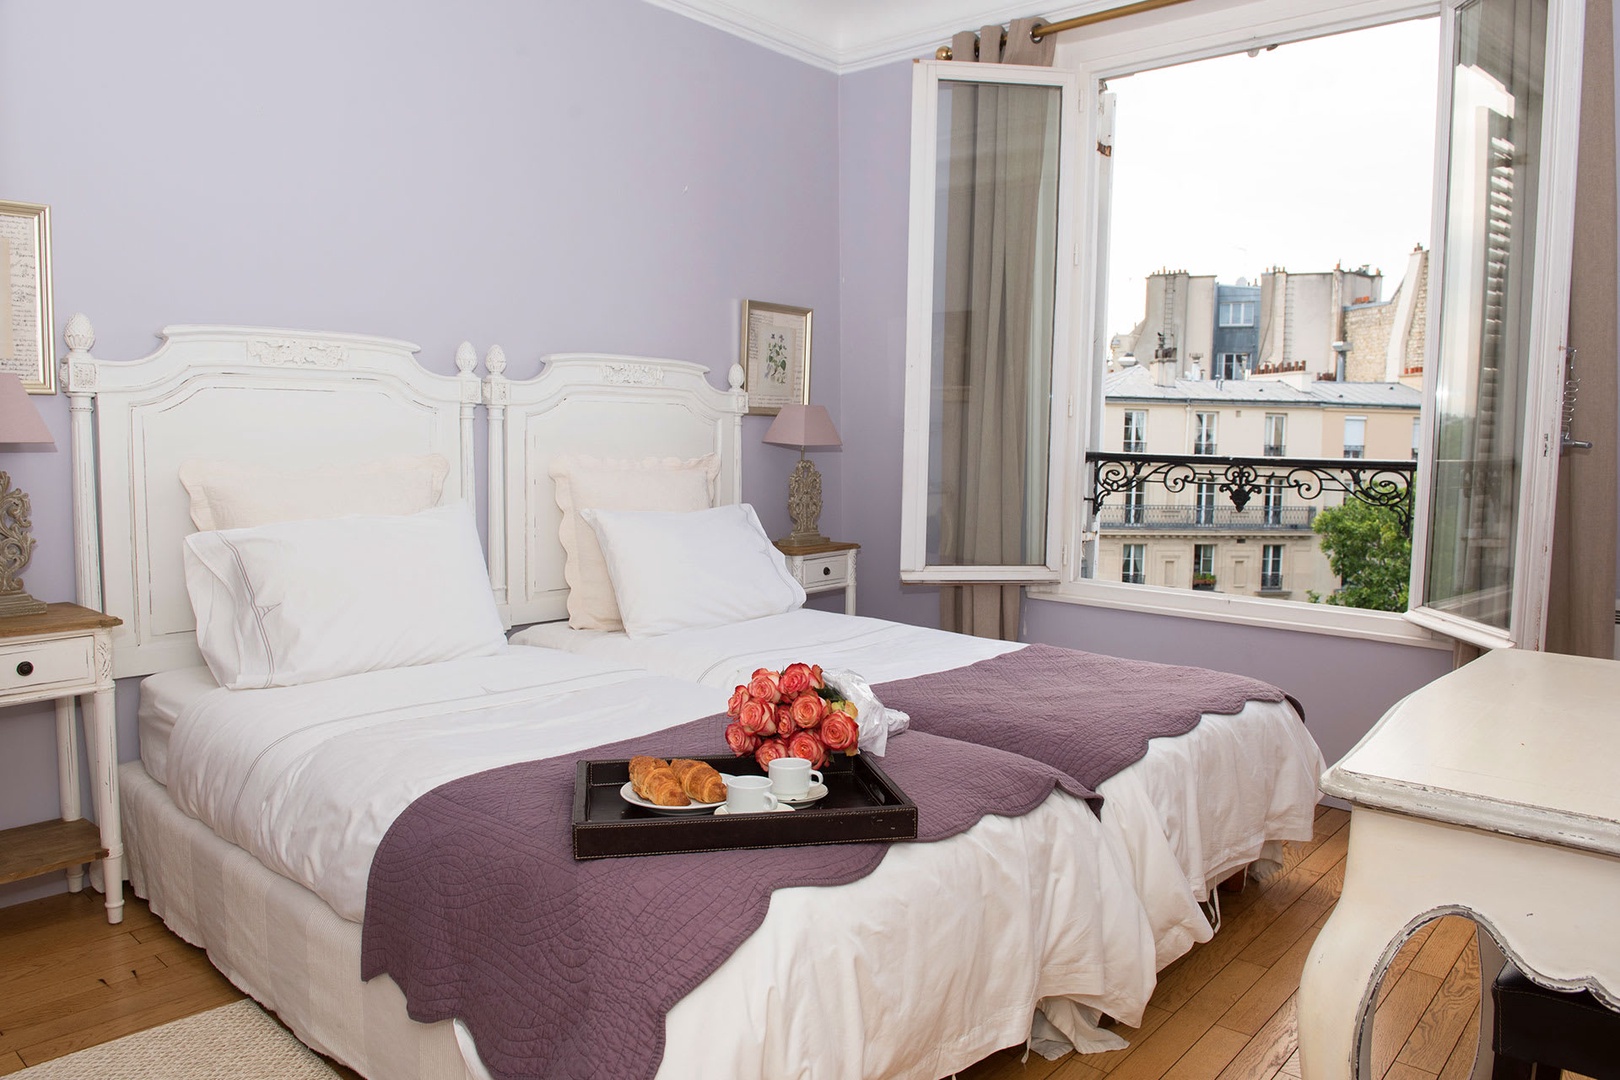 Bedroom 2 has comfy beds and an Eiffel Tower view.